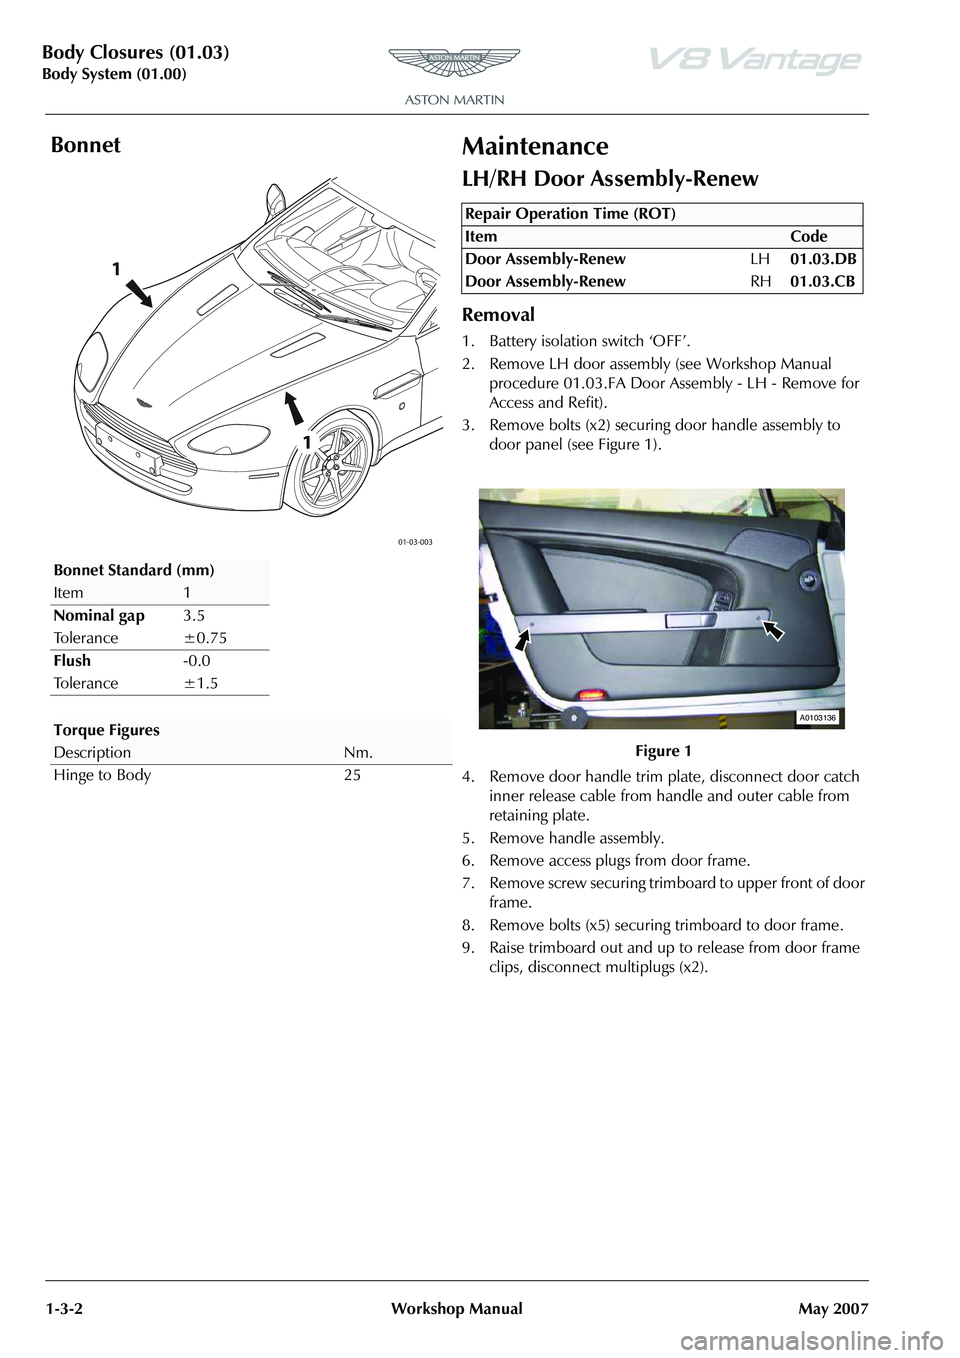 ASTON MARTIN V8 VANTAGE 2010  Workshop Manual Body Closures (01.03)
Body System (01.00)1-3-2 Workshop Manual May 2007
BonnetMaintenance
LH/RH Door Assembly-Renew
Removal
1. Battery isolation switch ‘OFF’.
2. Remove LH door assembly (see Works